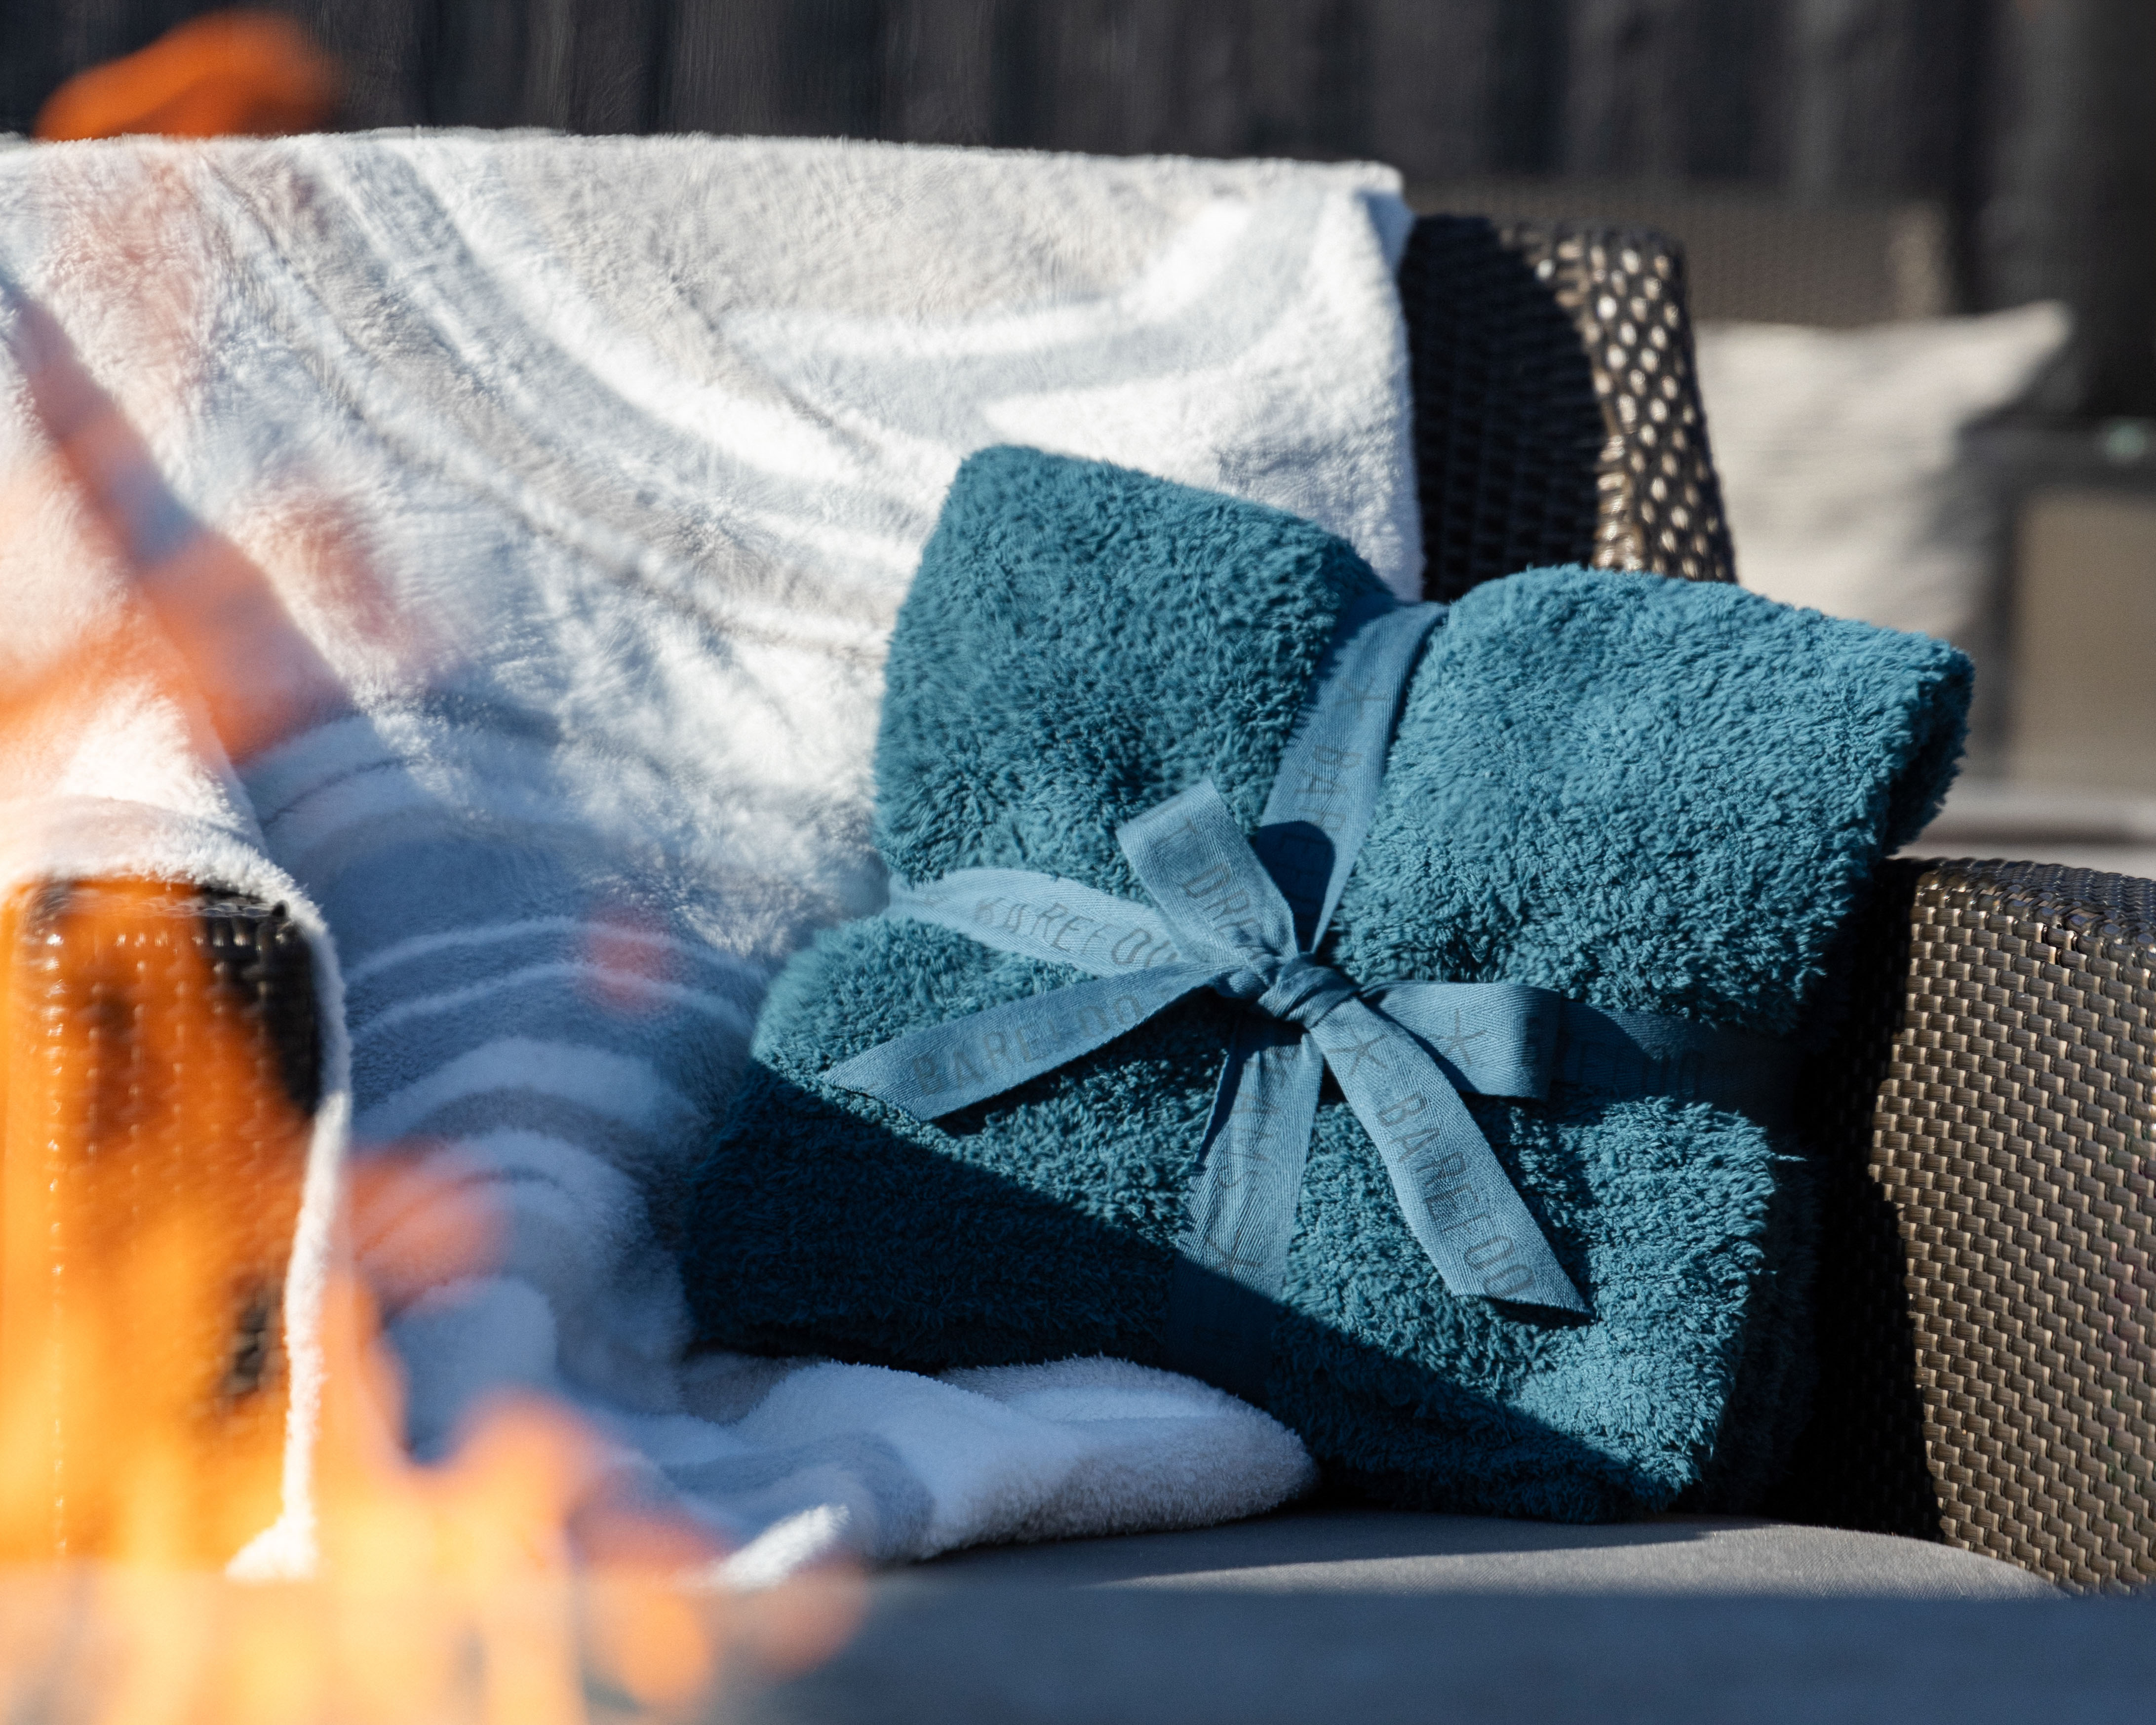 Chair in front of fire with blue Barefoot Dreams blanket.